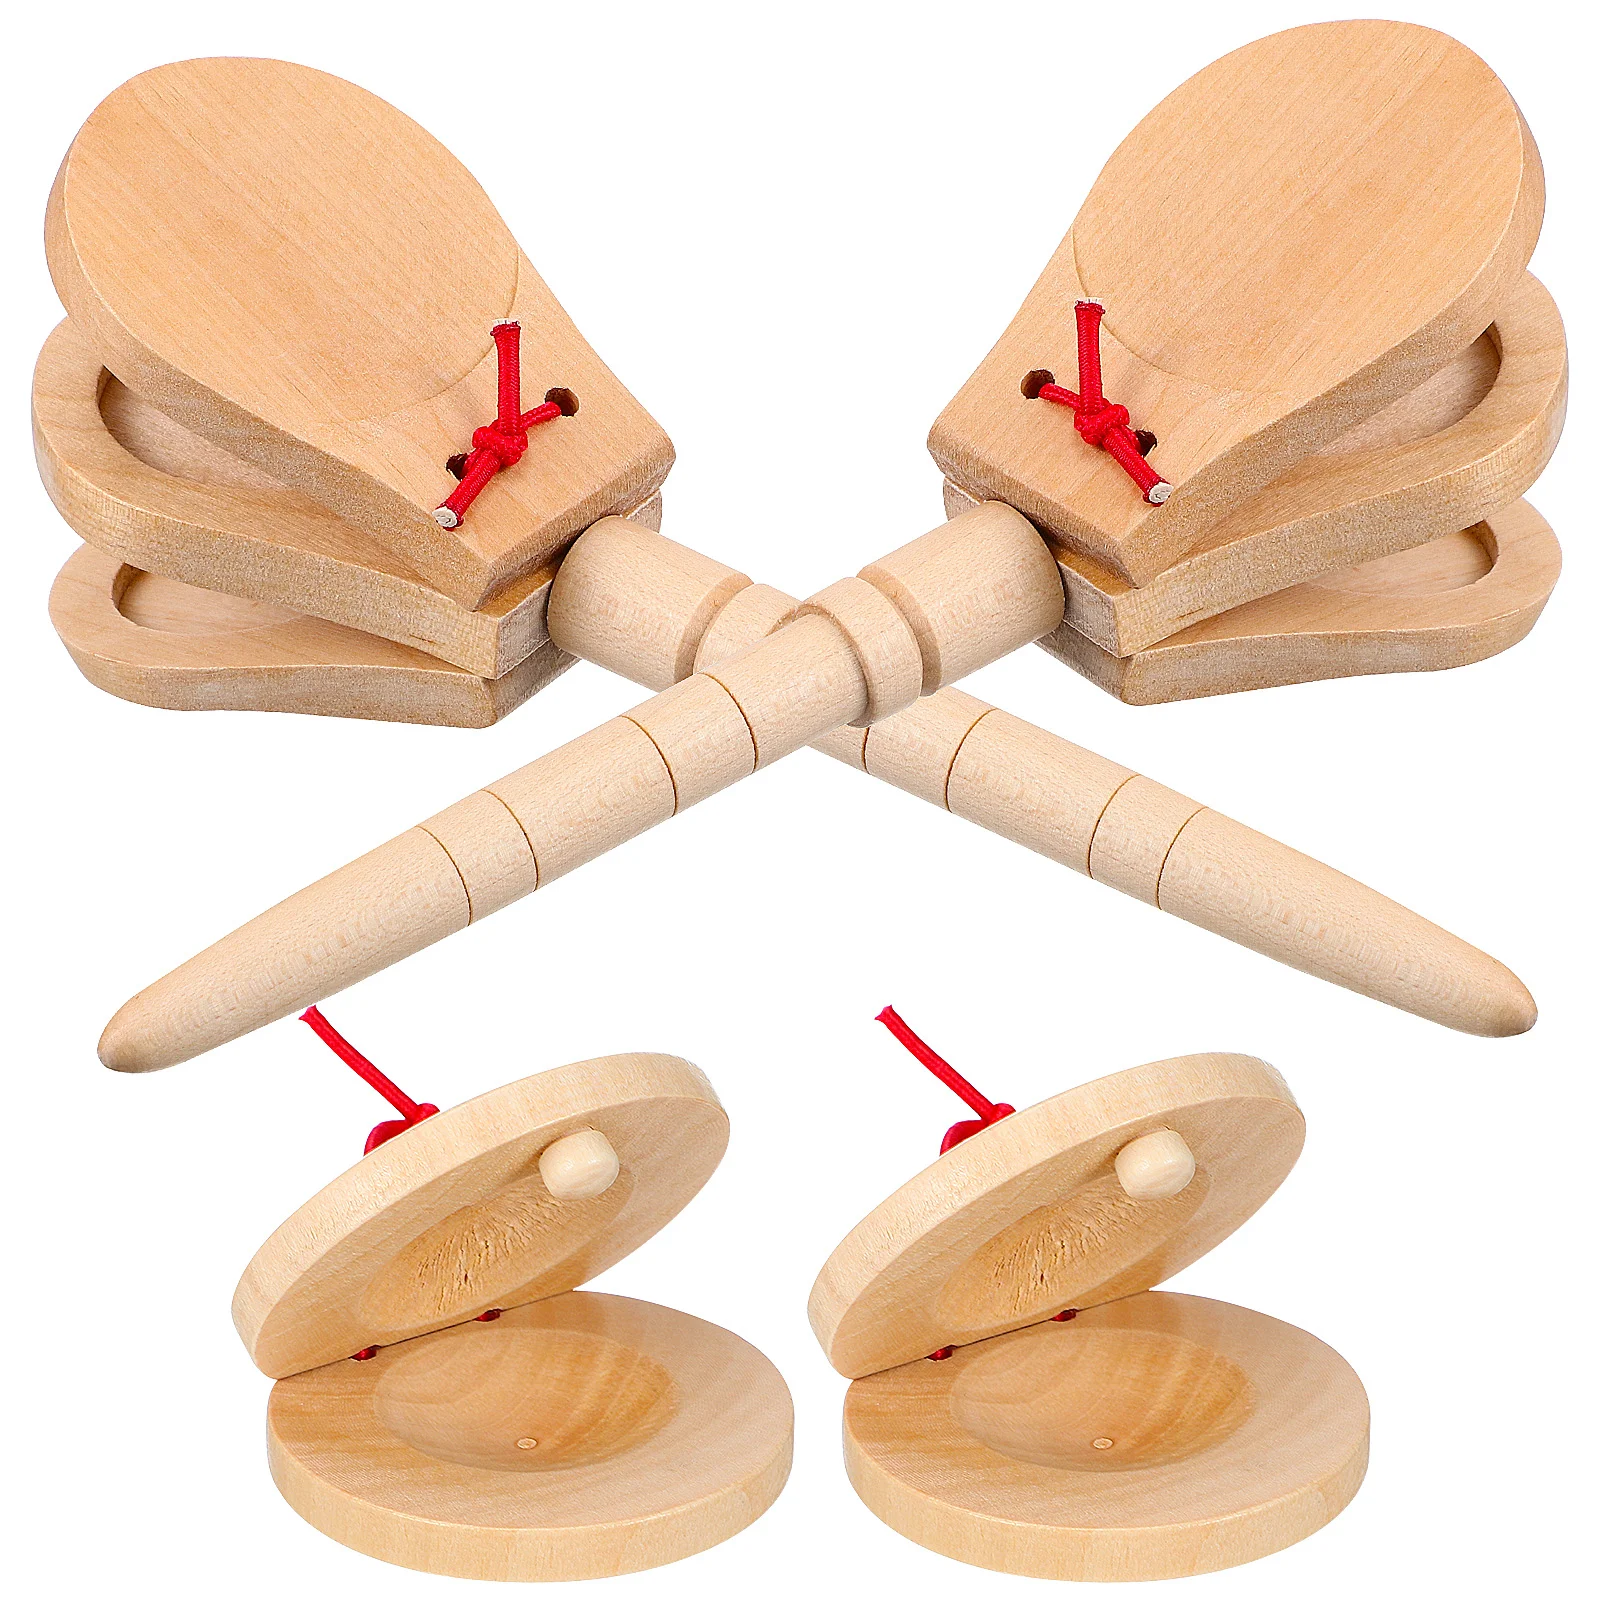 

4 Pcs Percussor Musical Instruments Beginners Percussion Castanets Wood Color Toys Wooden Mini